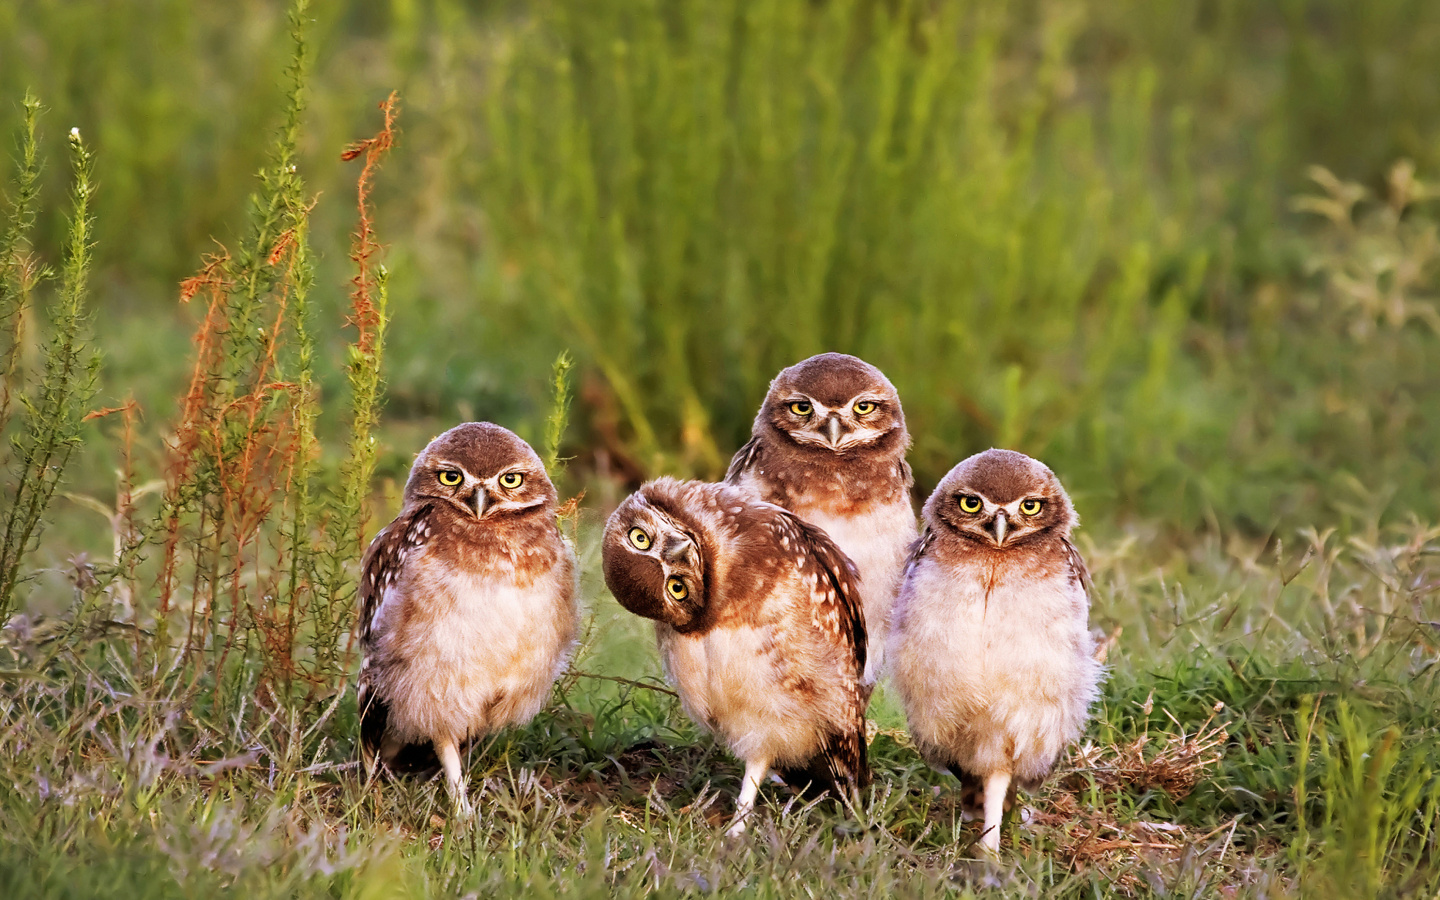 Morning with owls screenshot #1 1440x900